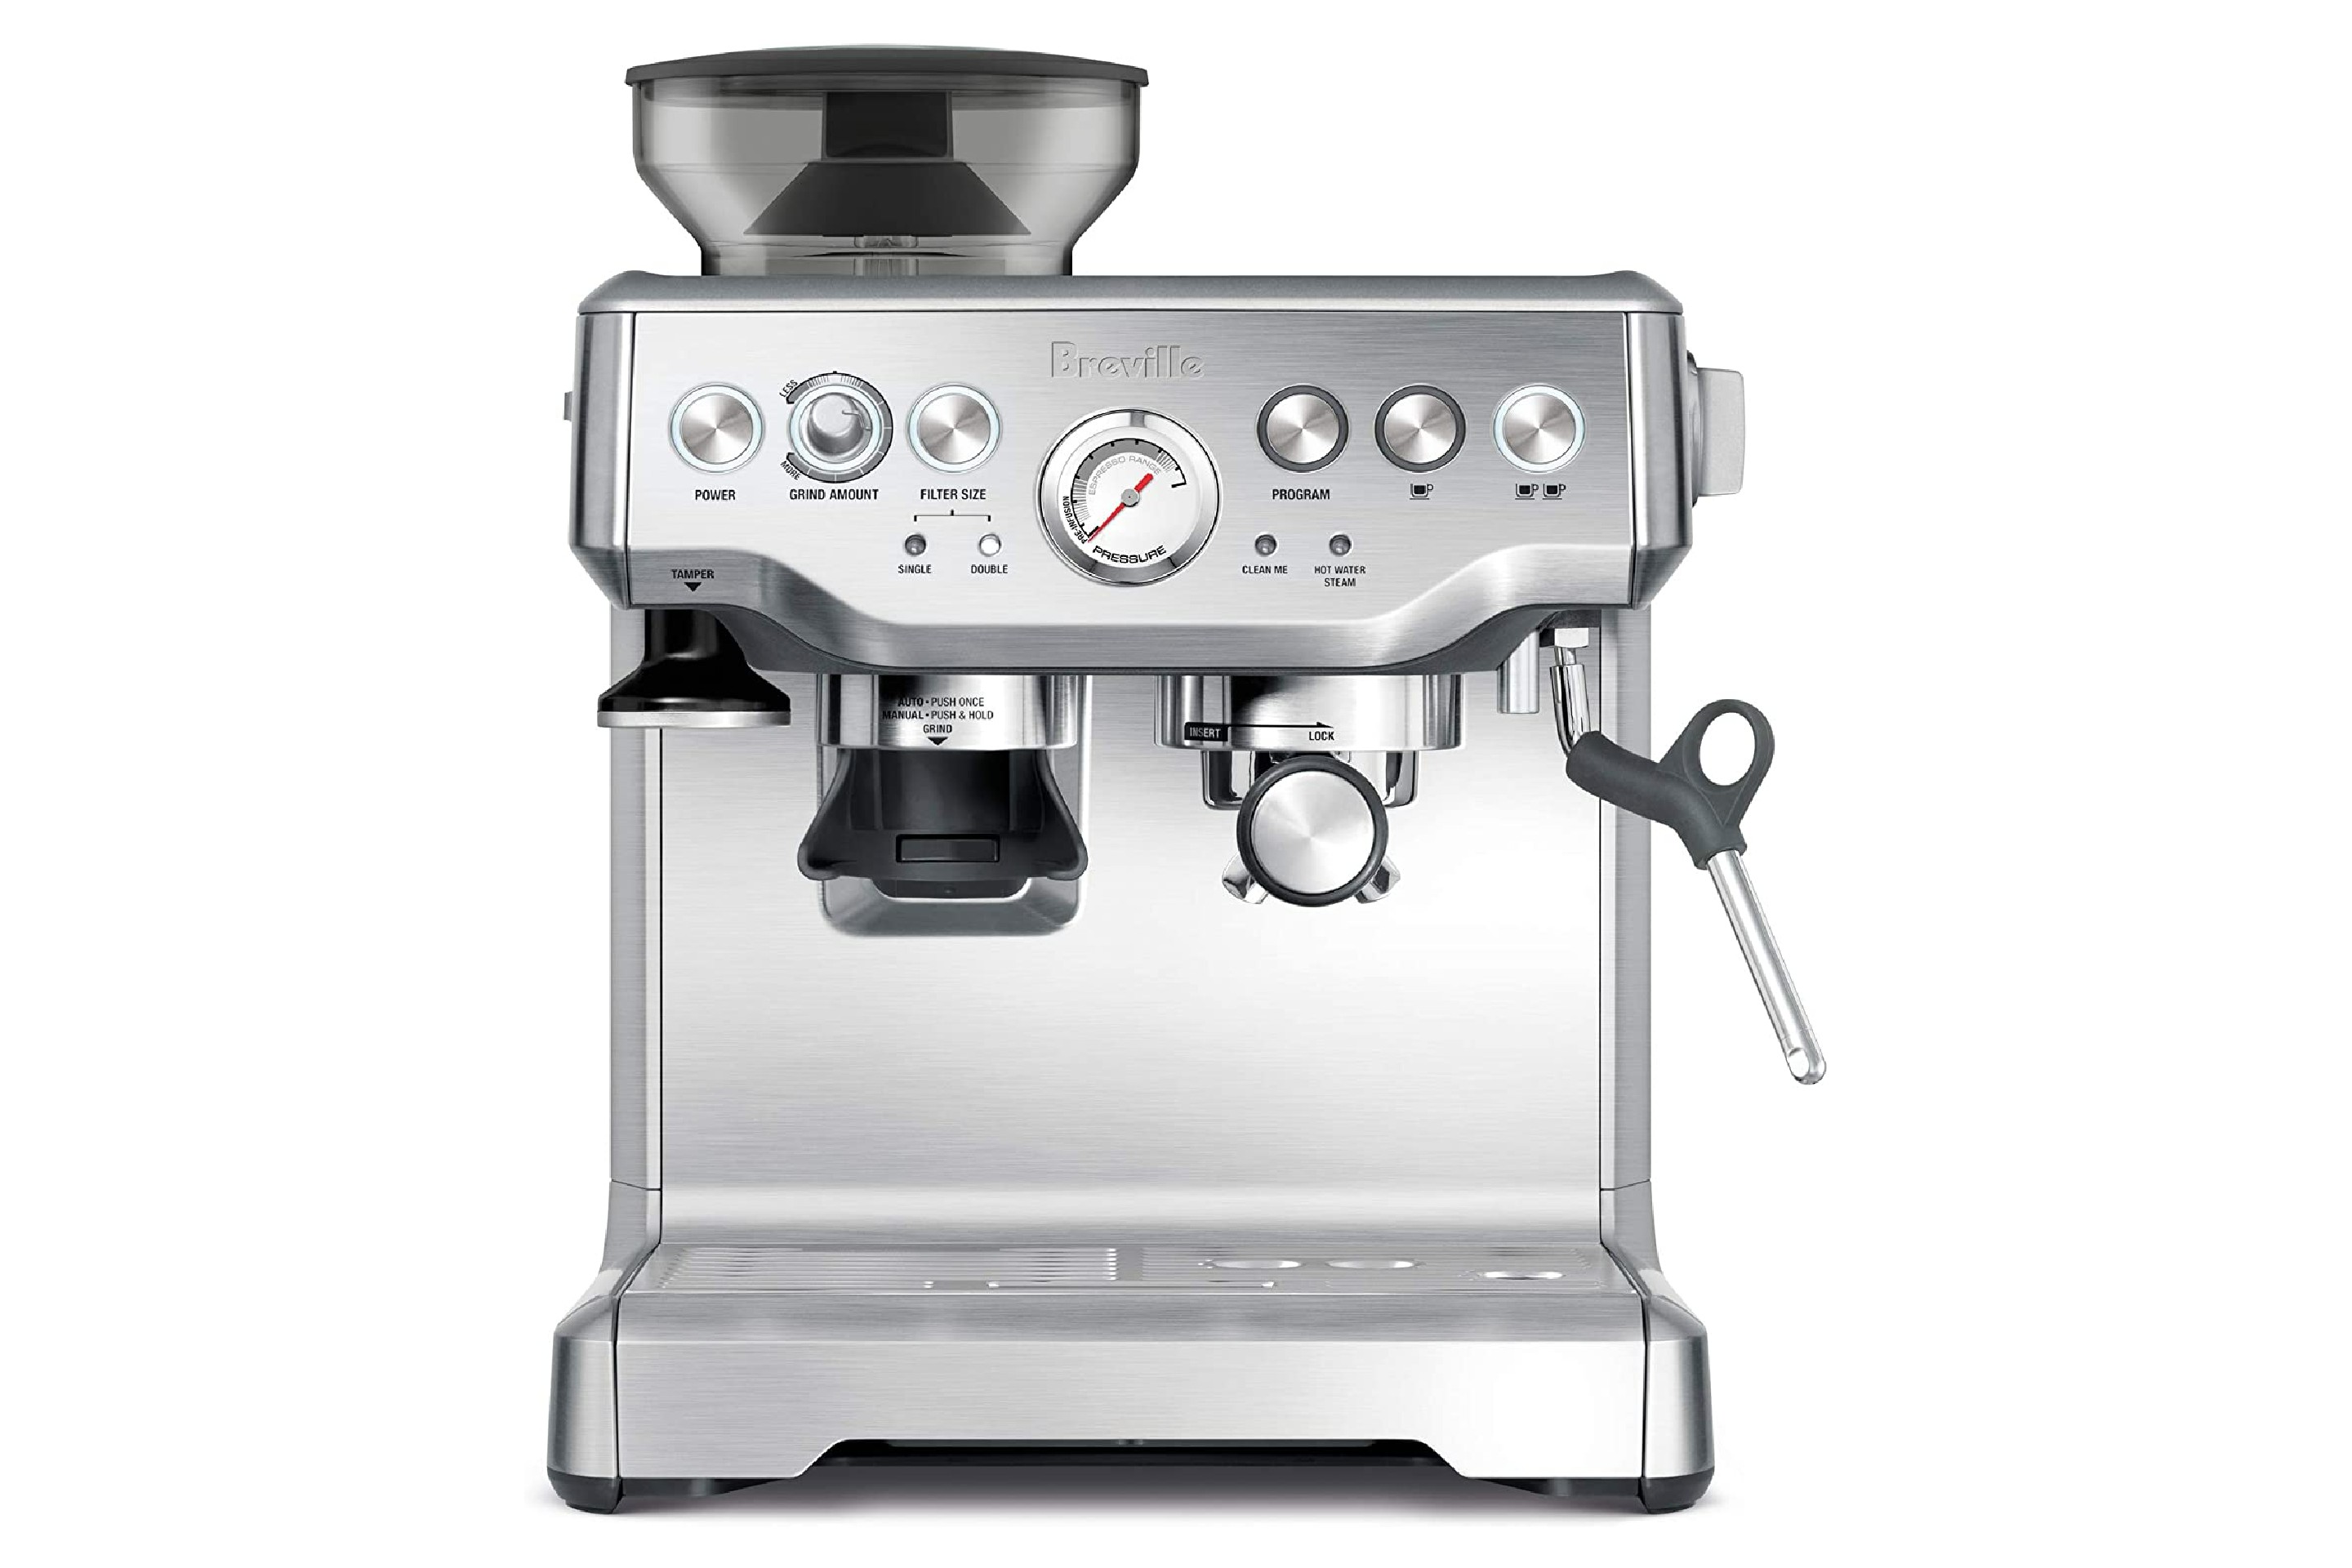 The best bean to cup coffee machines you can buy